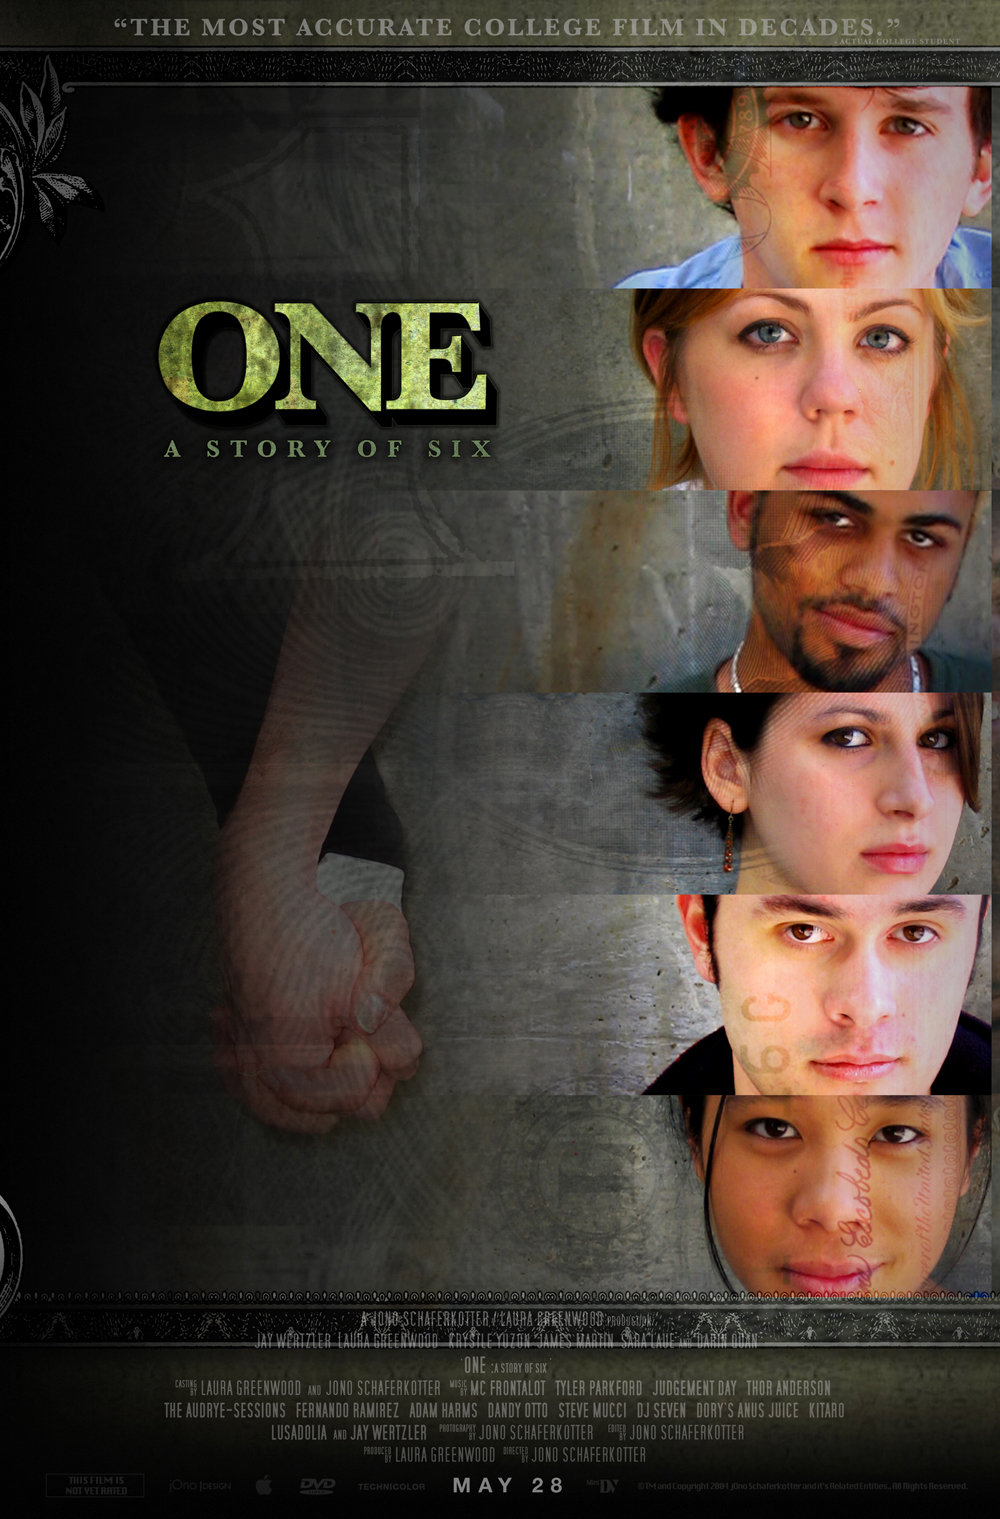 One: A Story of Six